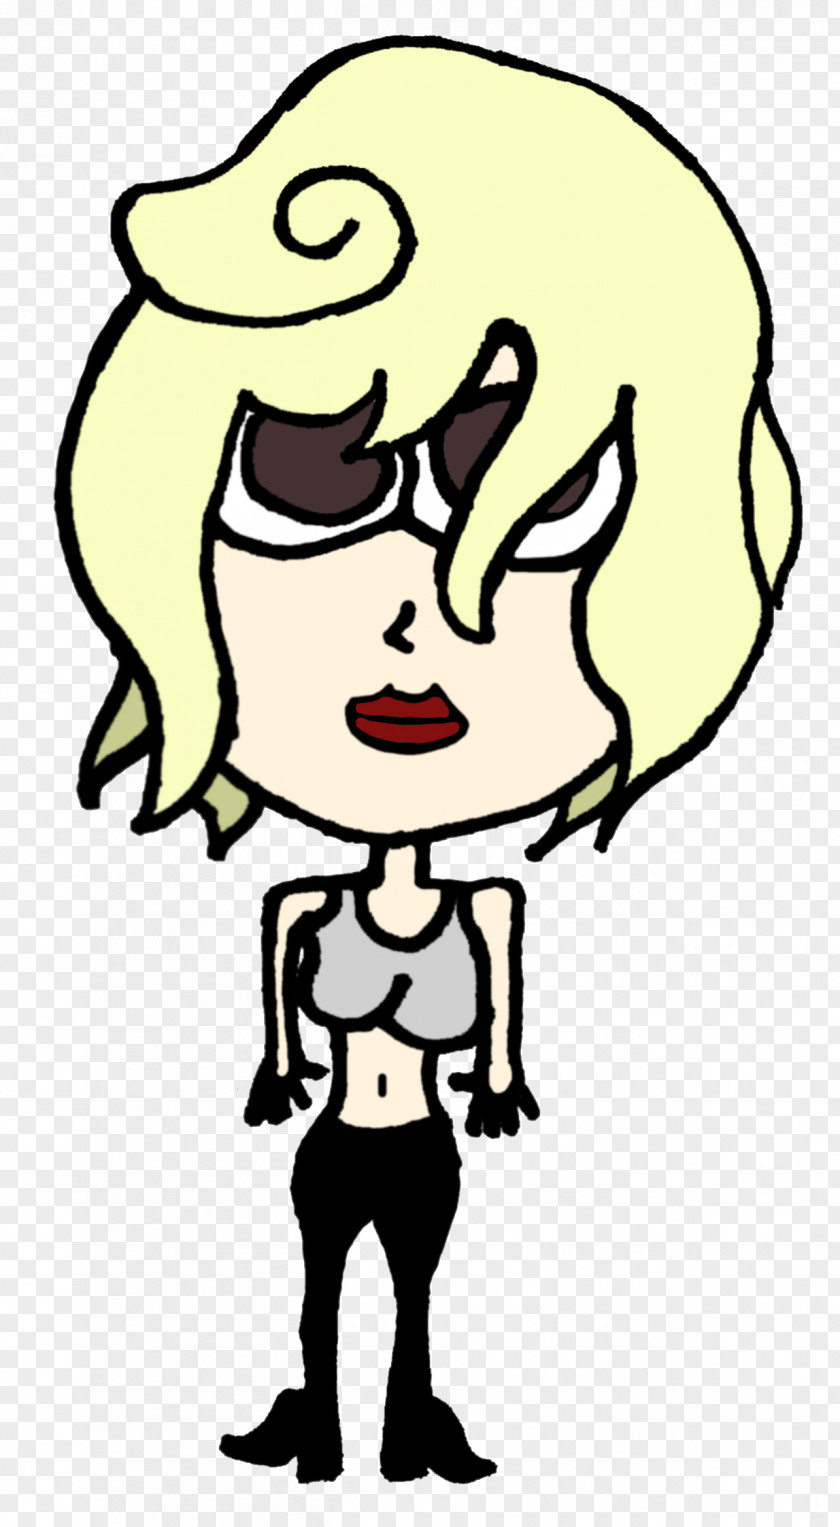 Lady Gaga Married Cartoon Drawing Human Marry The Night PNG